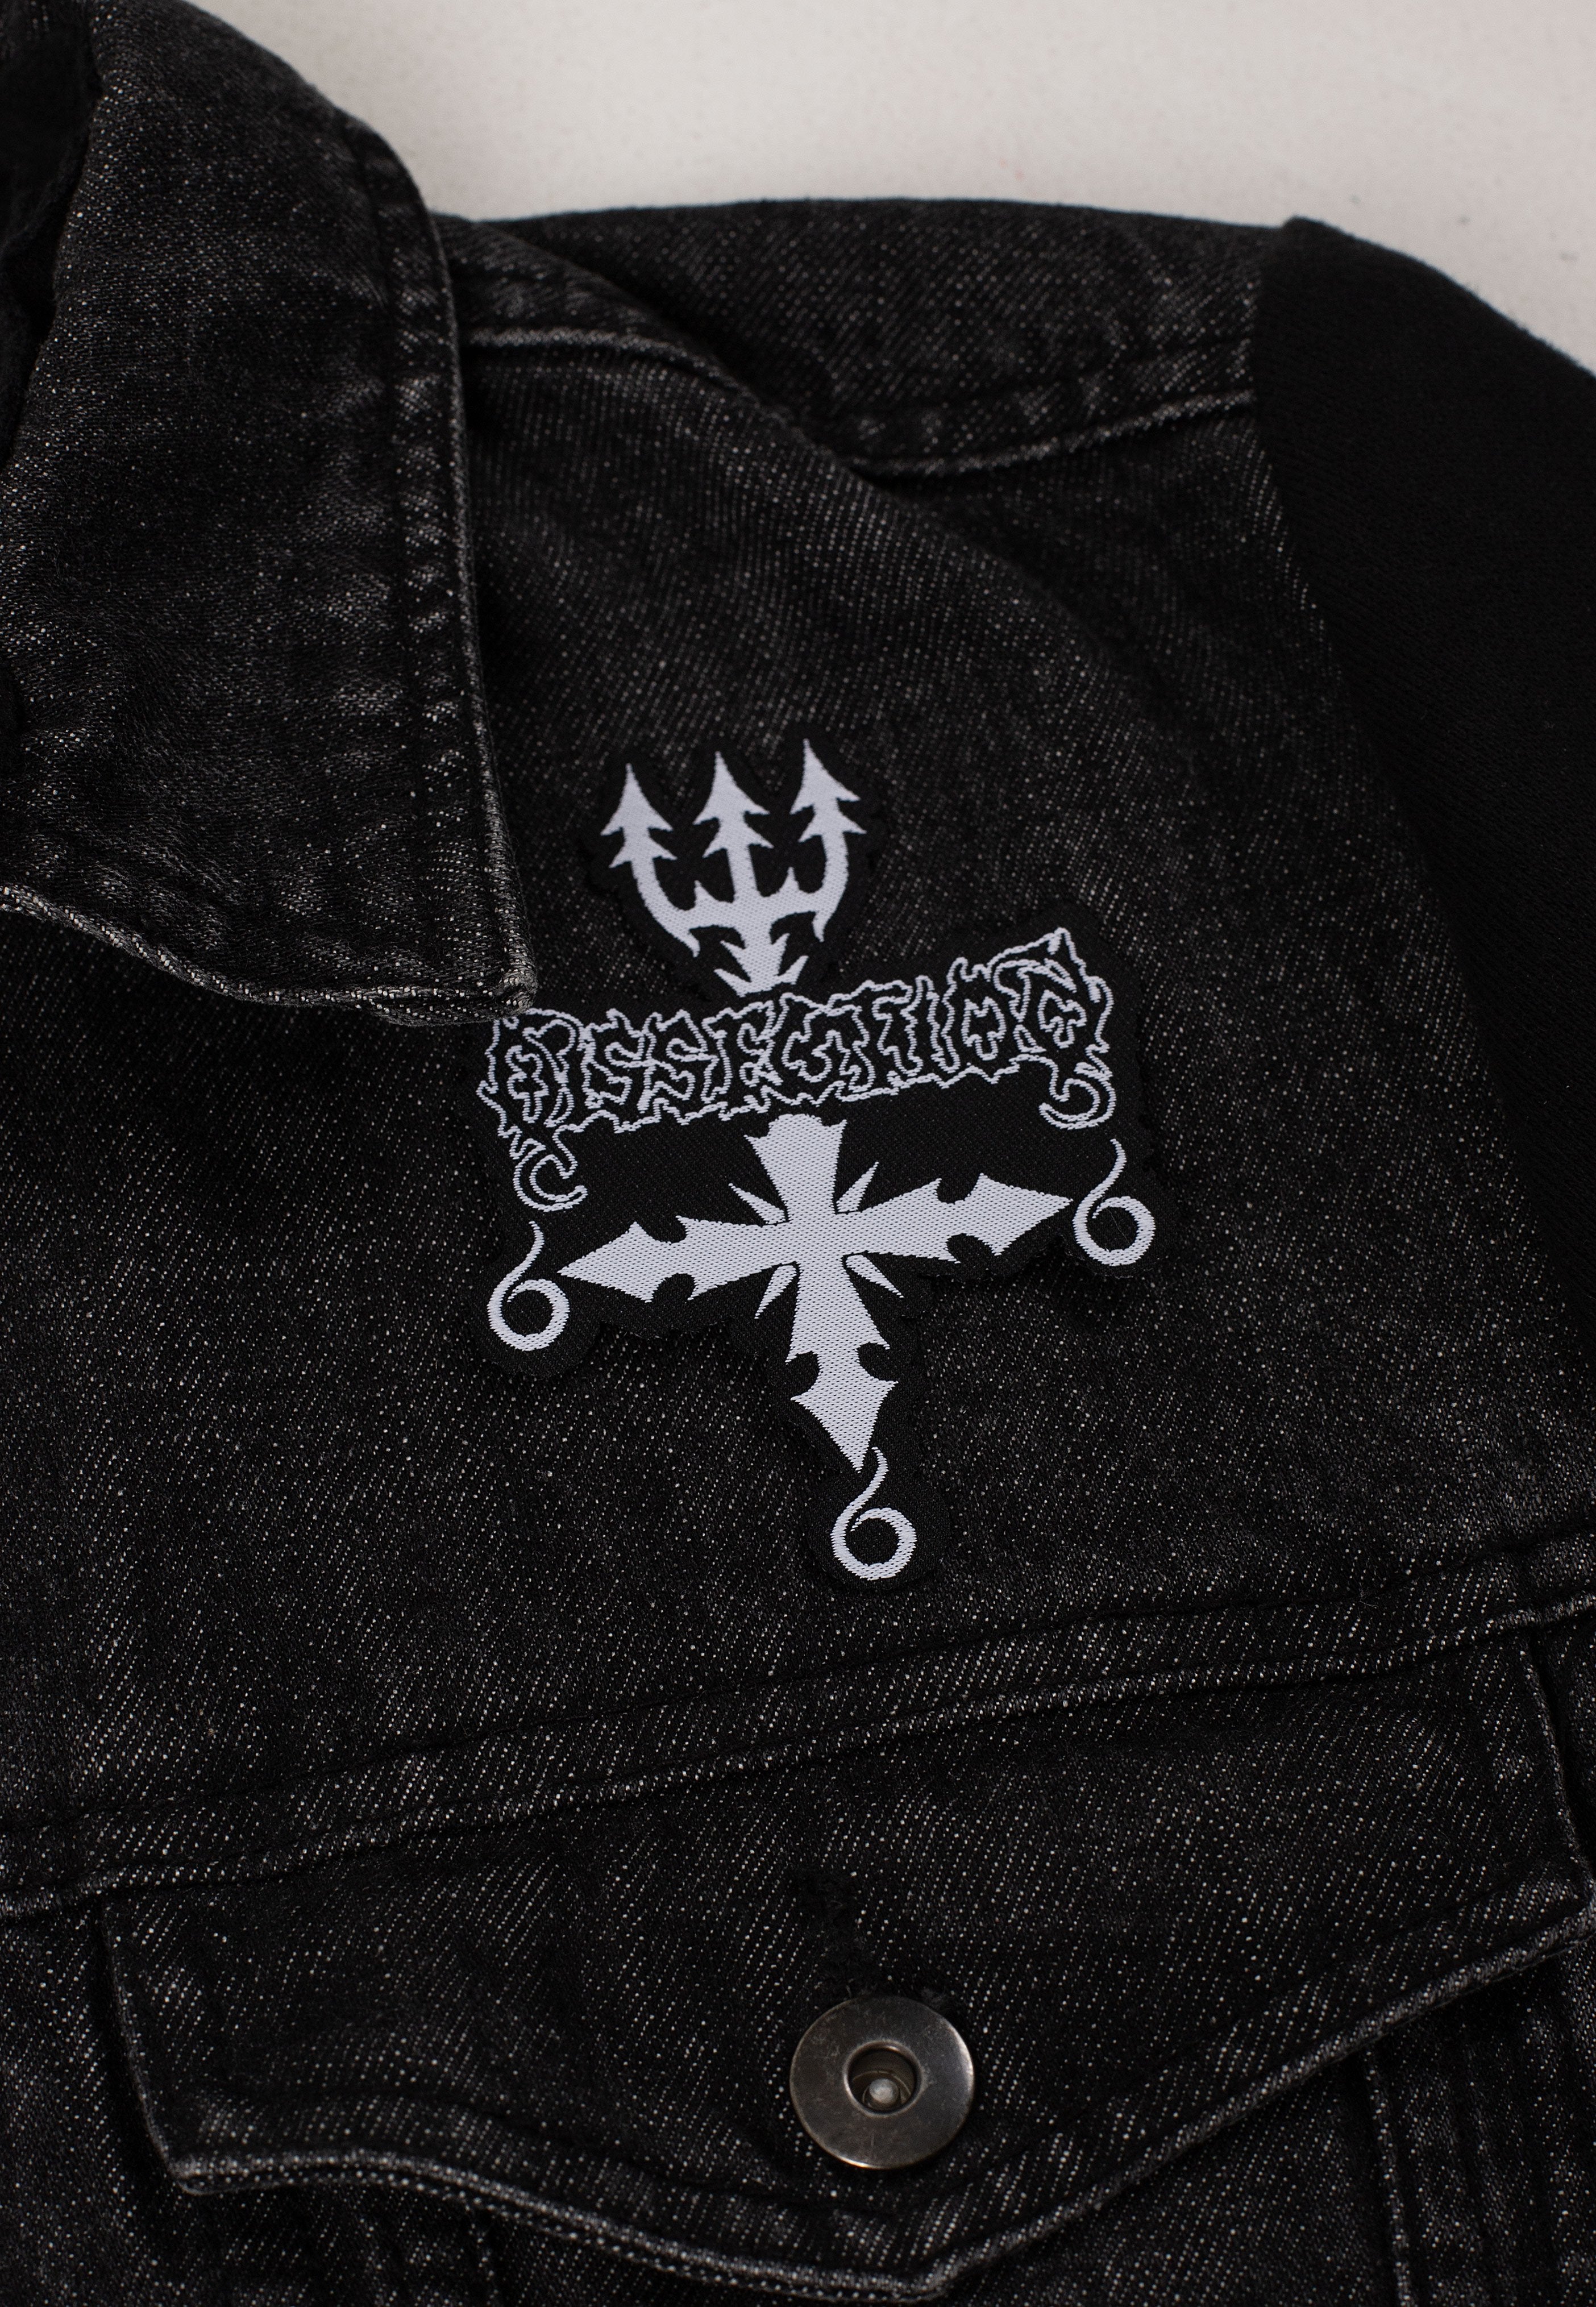 Dissection - Logo Cut Out - Patch